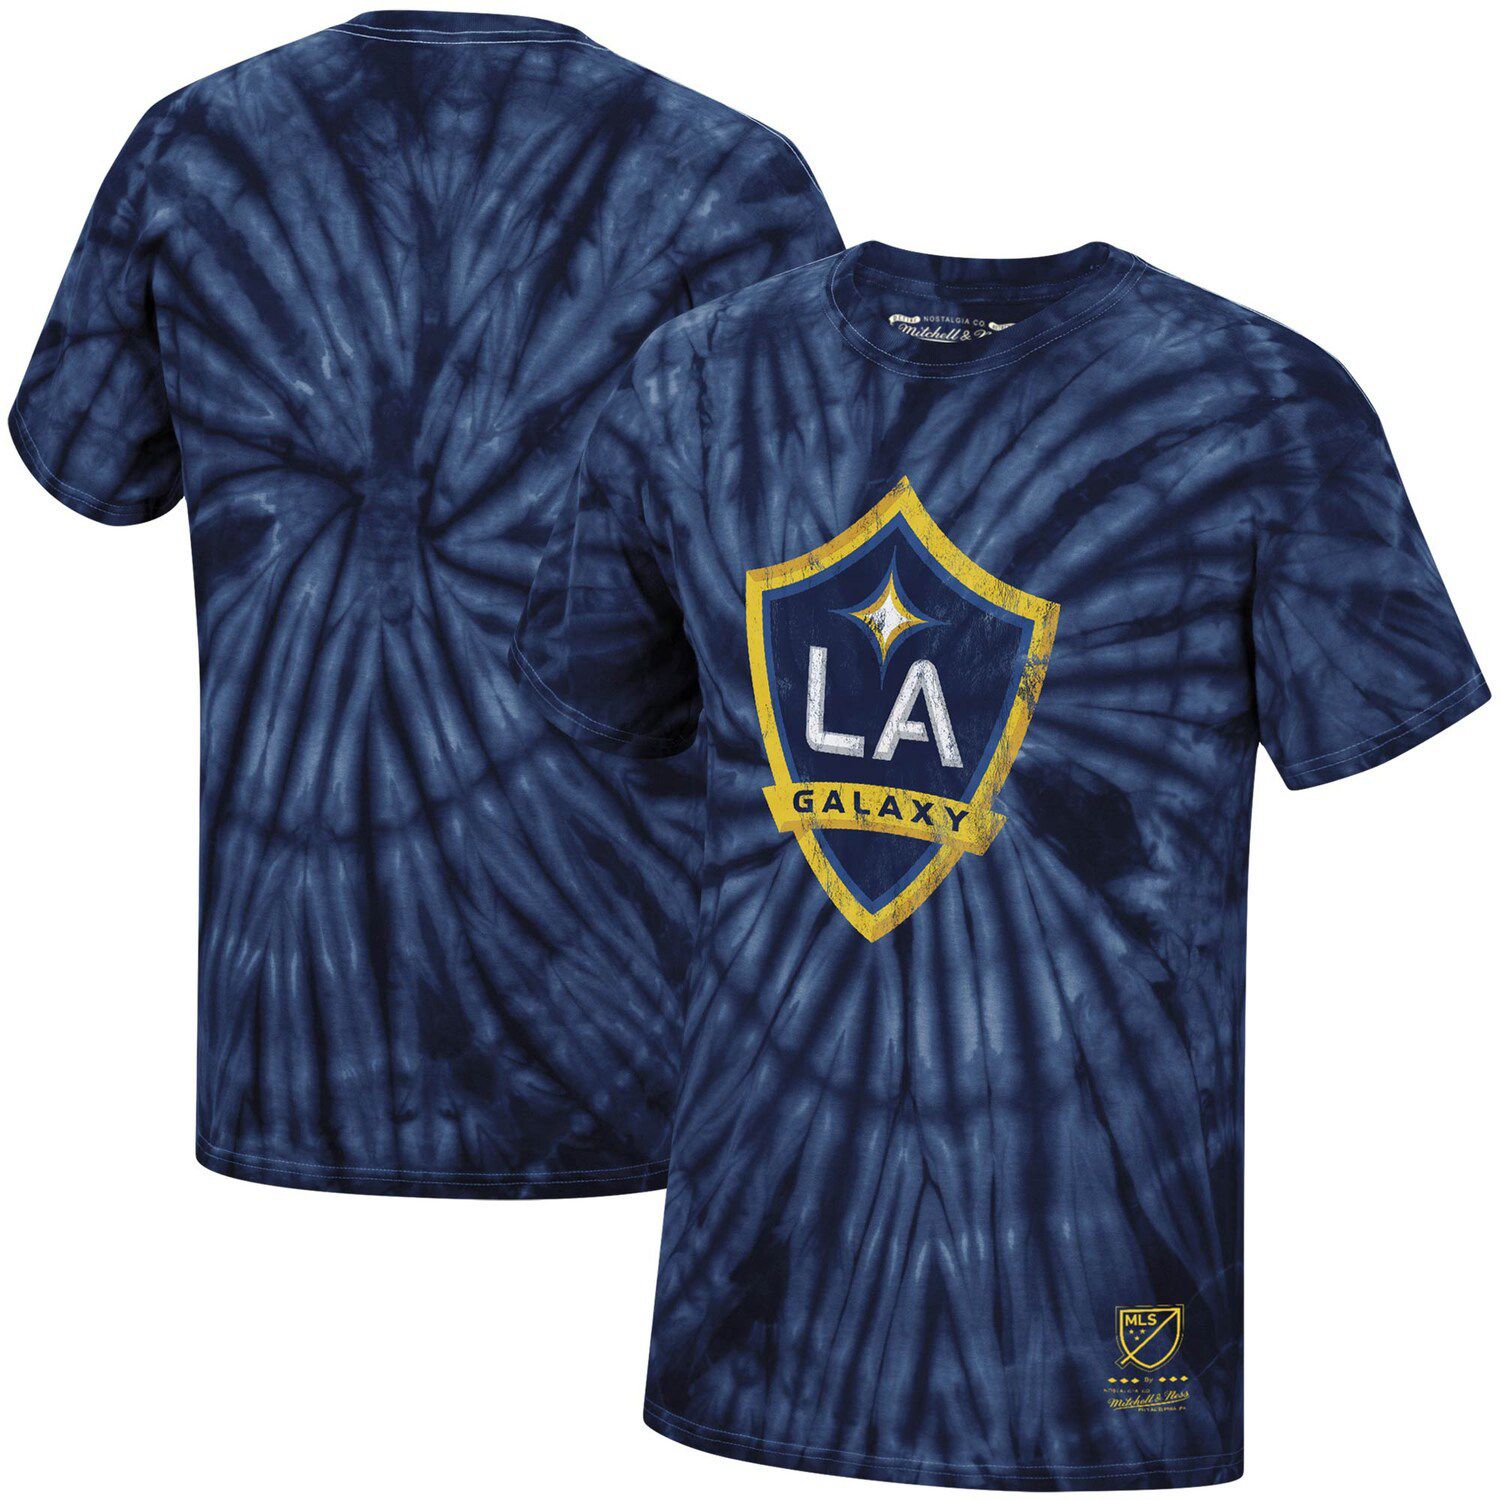 Image for Unbranded Men's Mitchell & Ness Navy LA Galaxy Vintage Tie Dye T-Shirt at Kohl's.